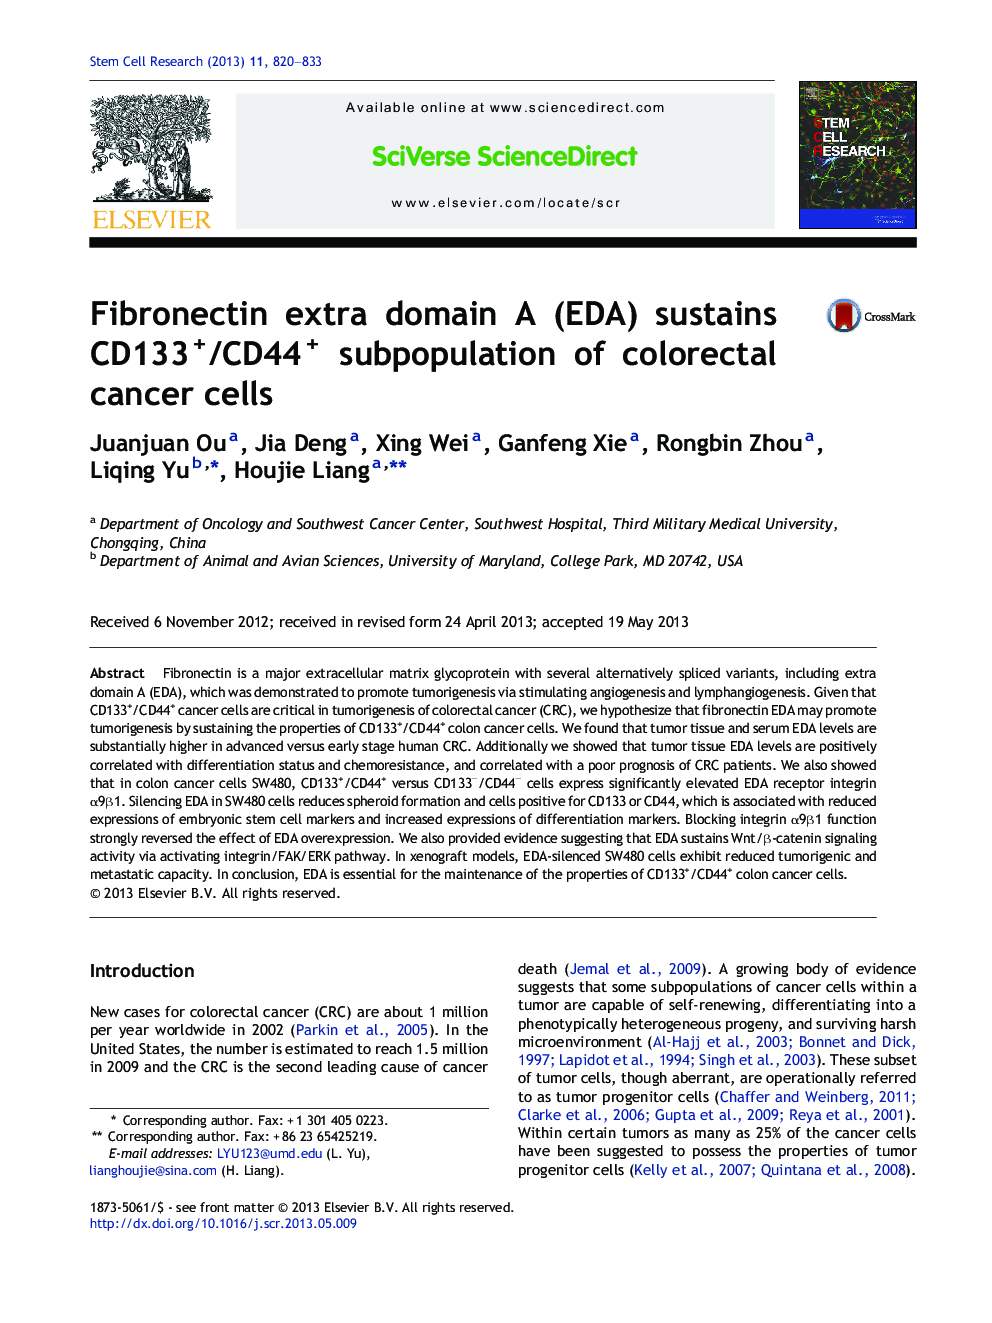 Fibronectin extra domain A (EDA) sustains CD133+/CD44+ subpopulation of colorectal cancer cells